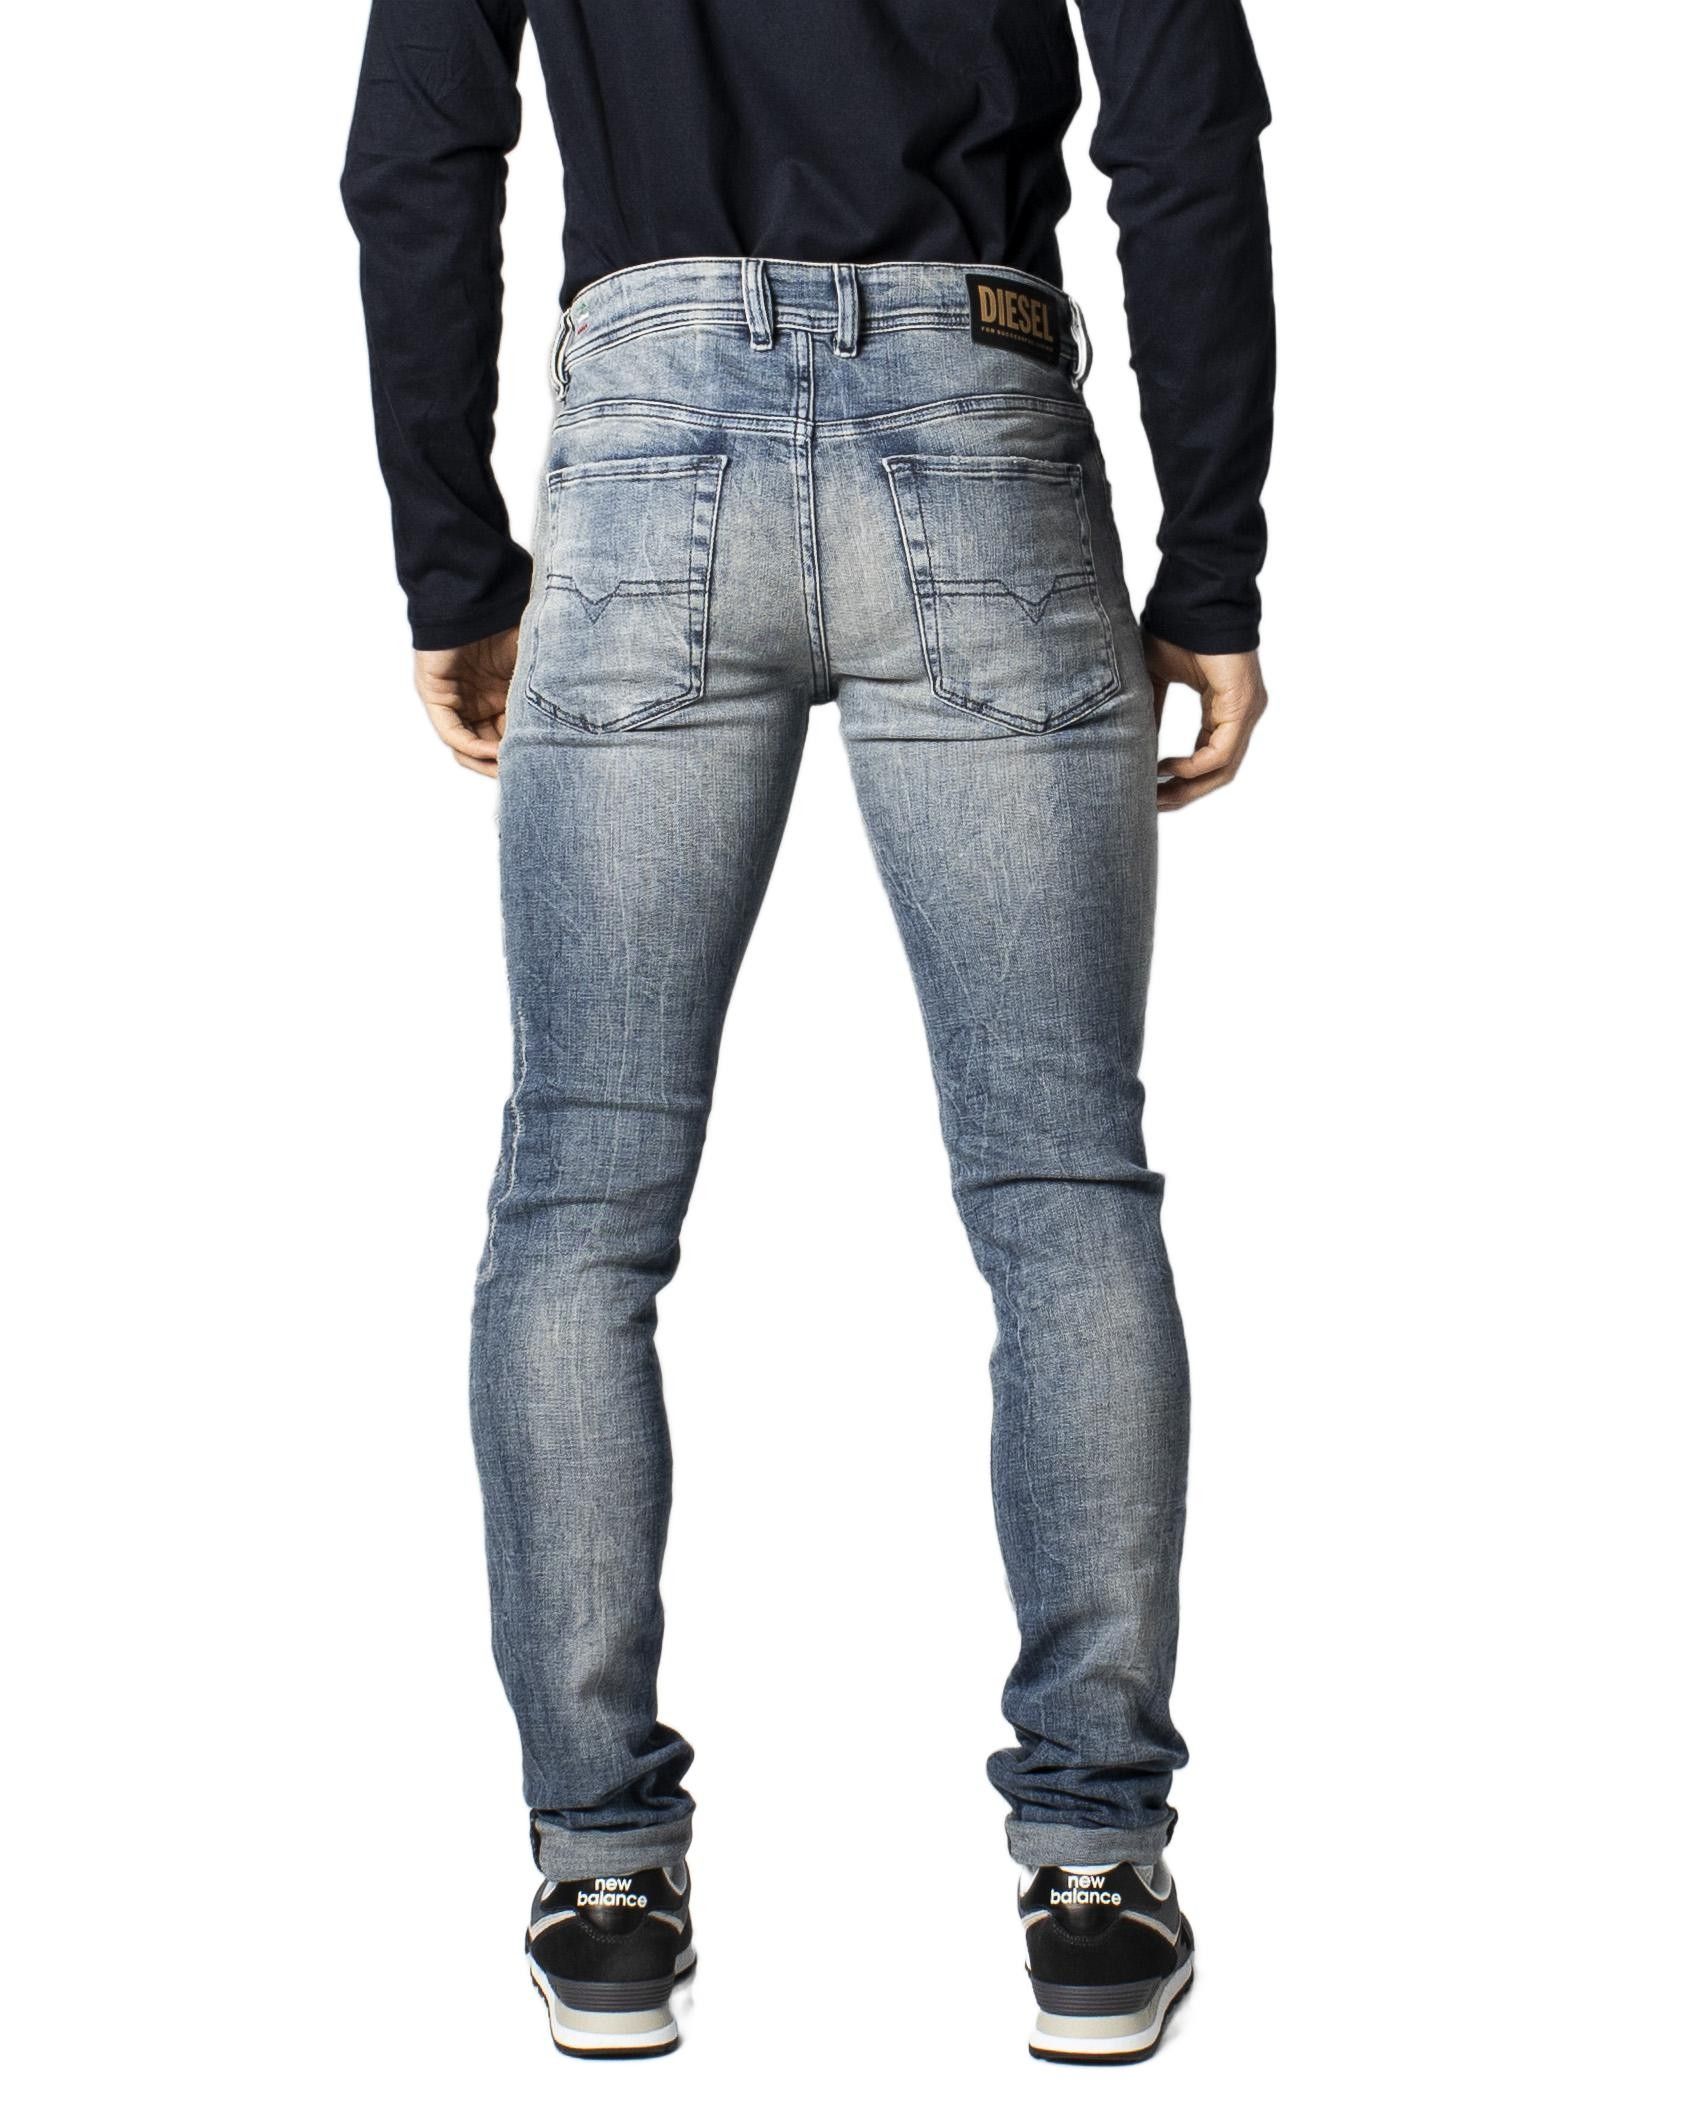 Brand: Diesel   Gender: Men   Type: Jeans   Color: Blue   Fastening: Zip and Button   Pockets: Front and Back Pockets   Season: Spring/summer